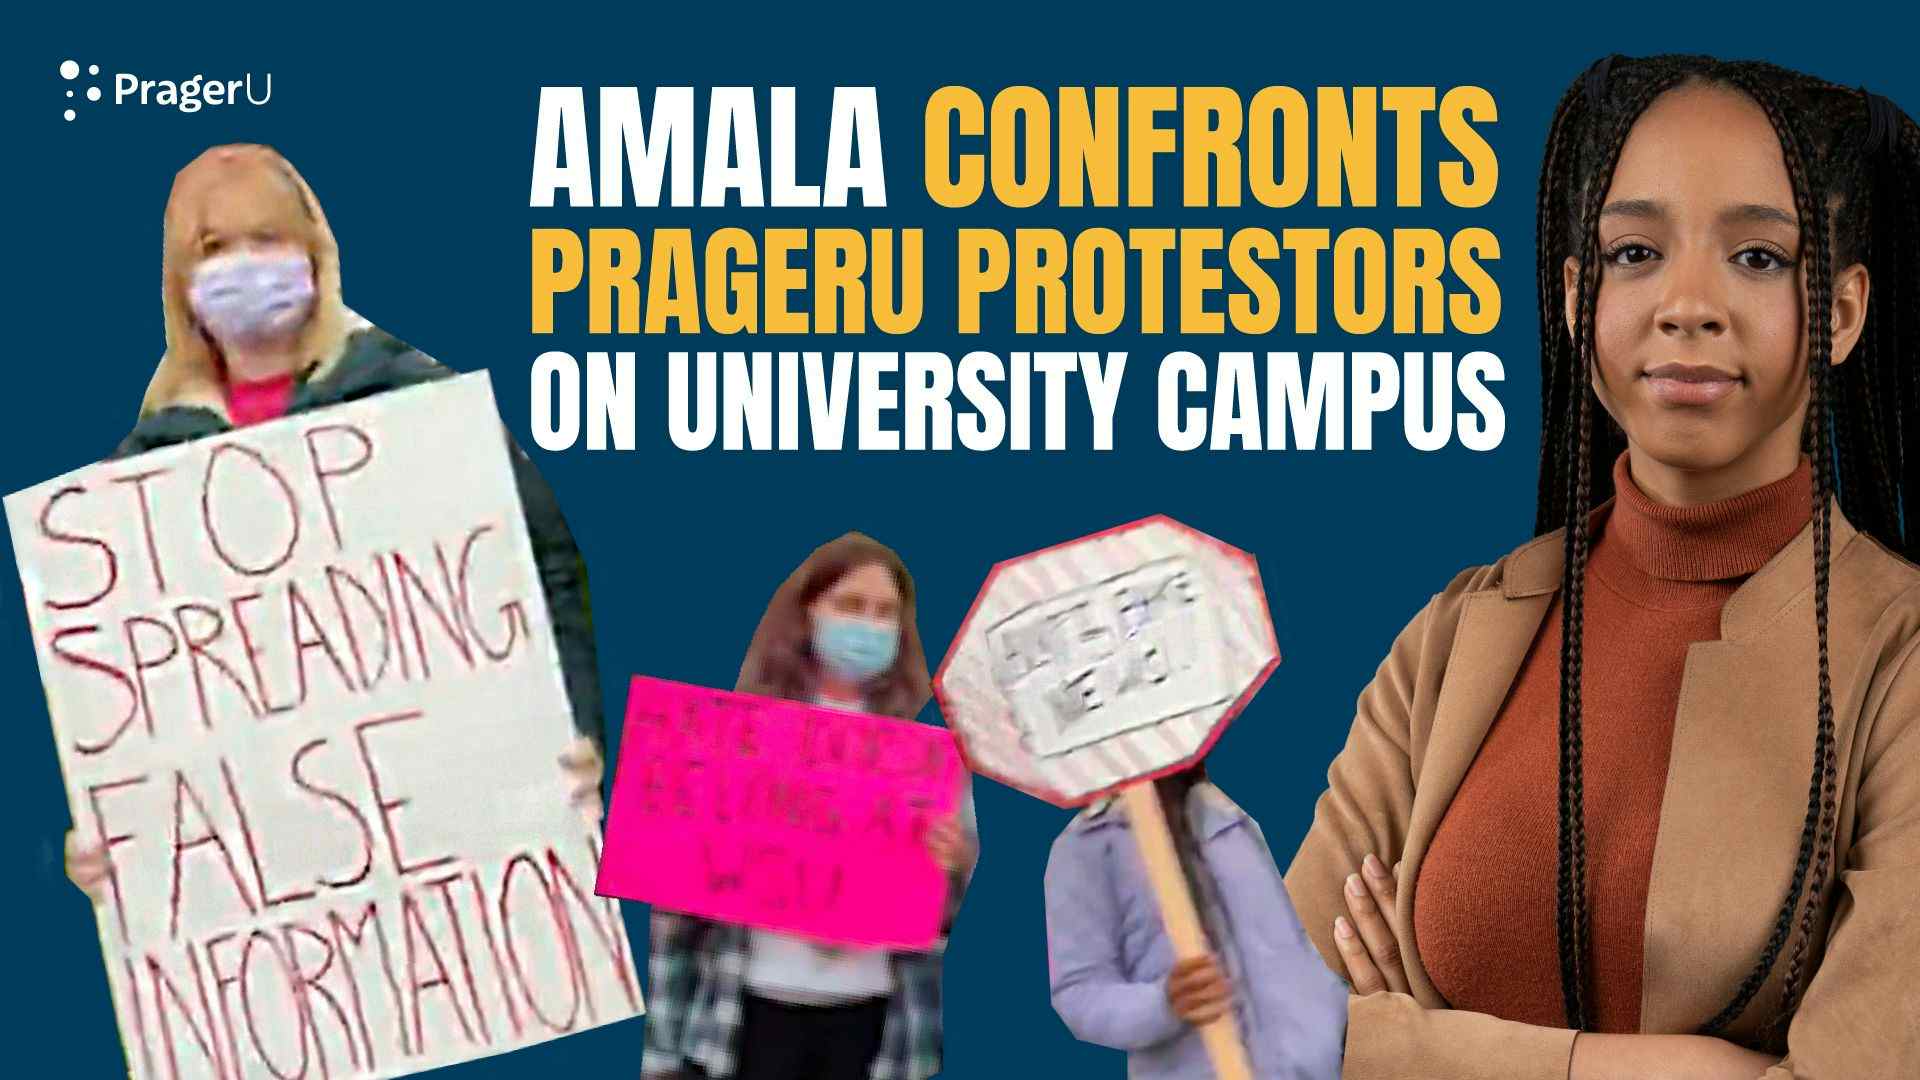 PROTESTORS CONFRONTED: Amala fearlessly confronts protests at speaking event